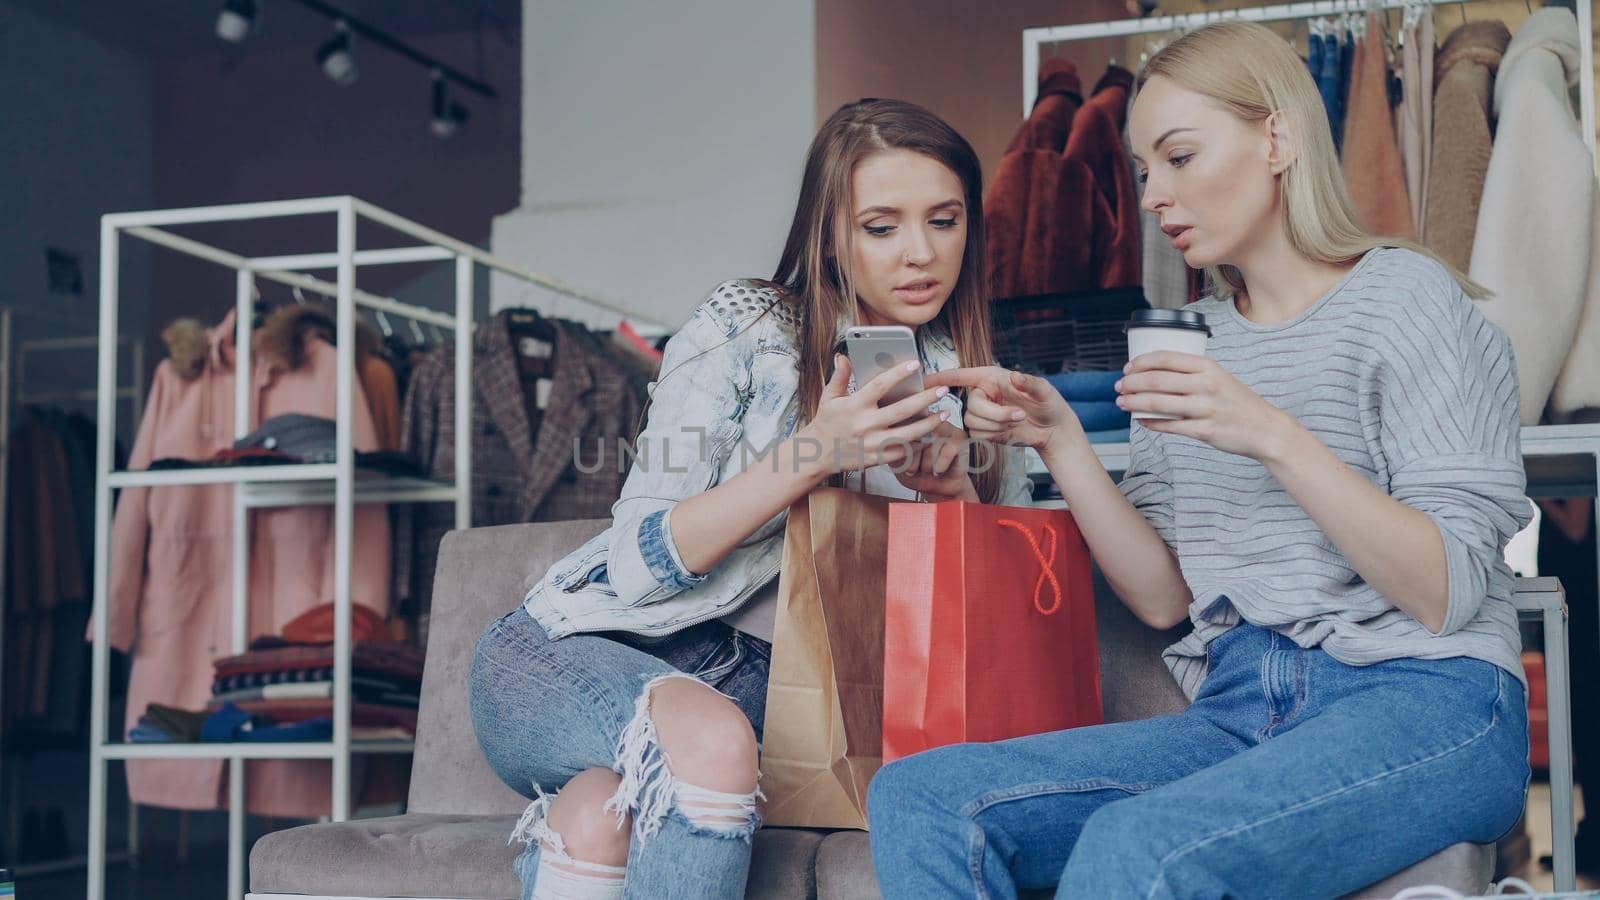 Attractive young ladies sitting on chairs in a clothing store with coffee and shopping bags, checking smartphone and talking. Shelves and hangers with colourful clothes in background